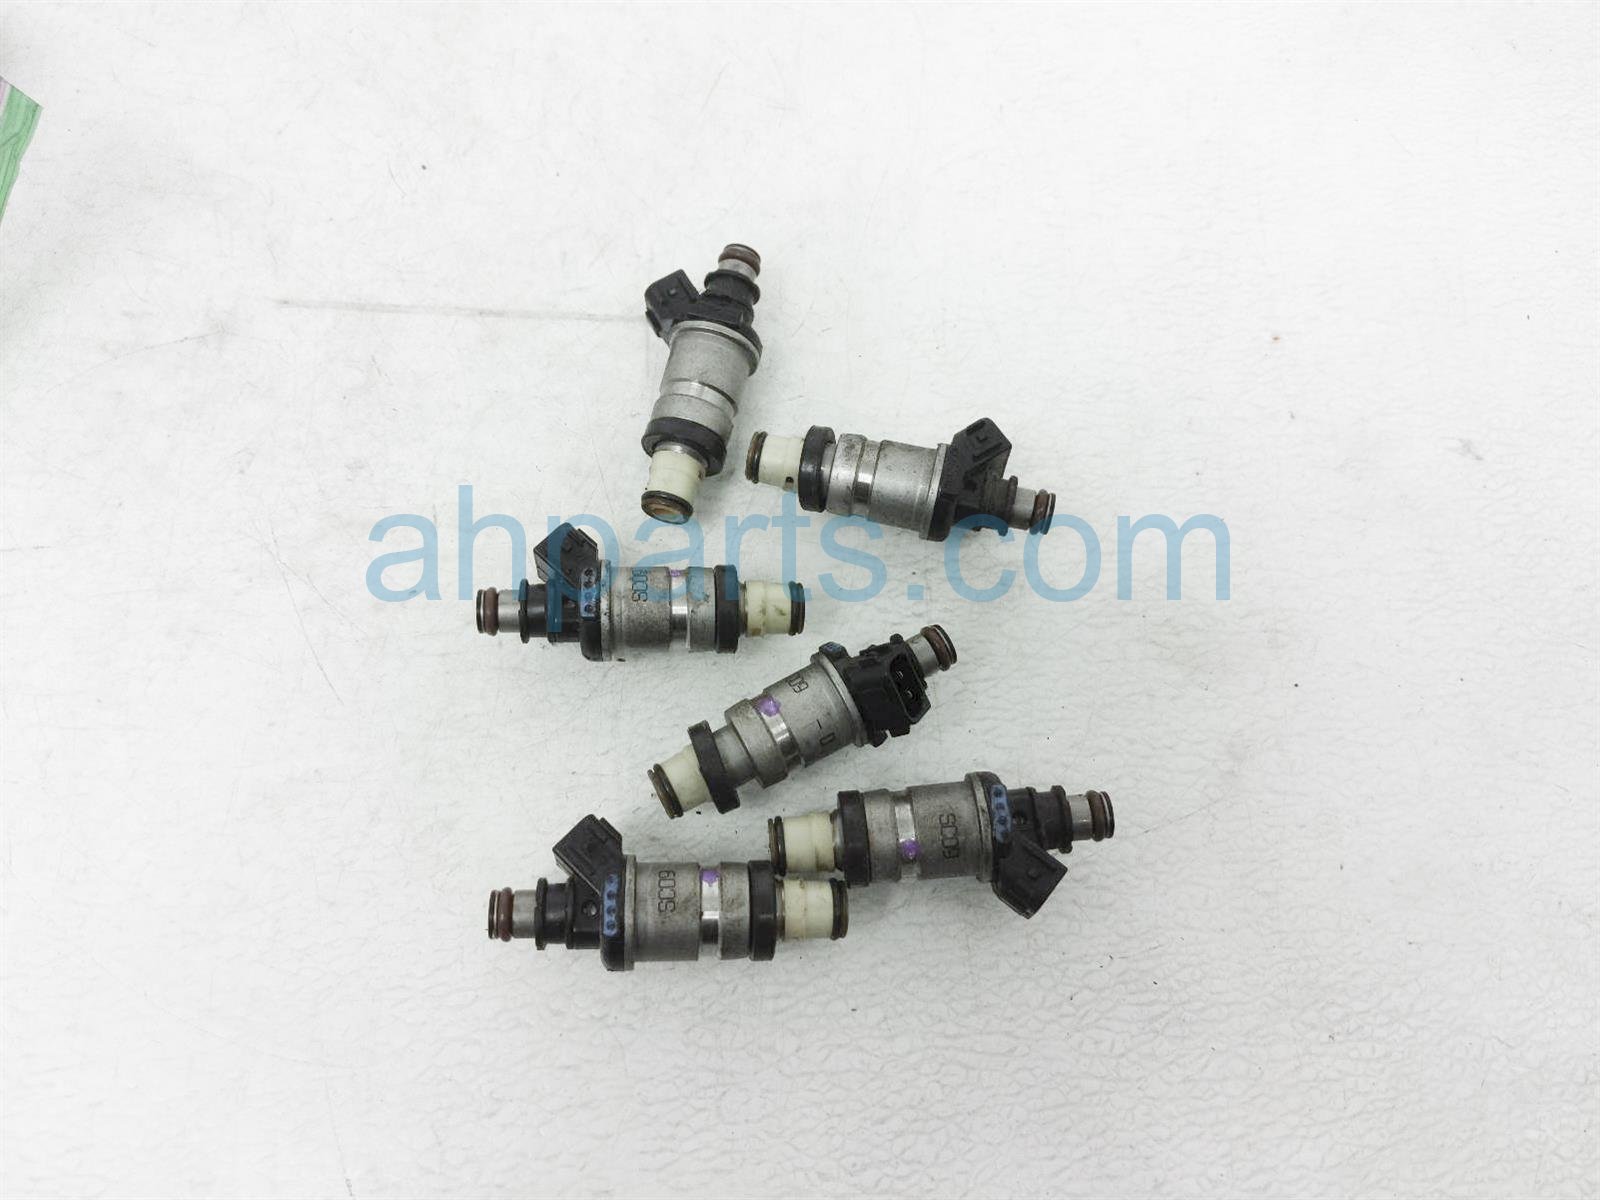 $300 Acura QTY 6 FUEL INJECTOR